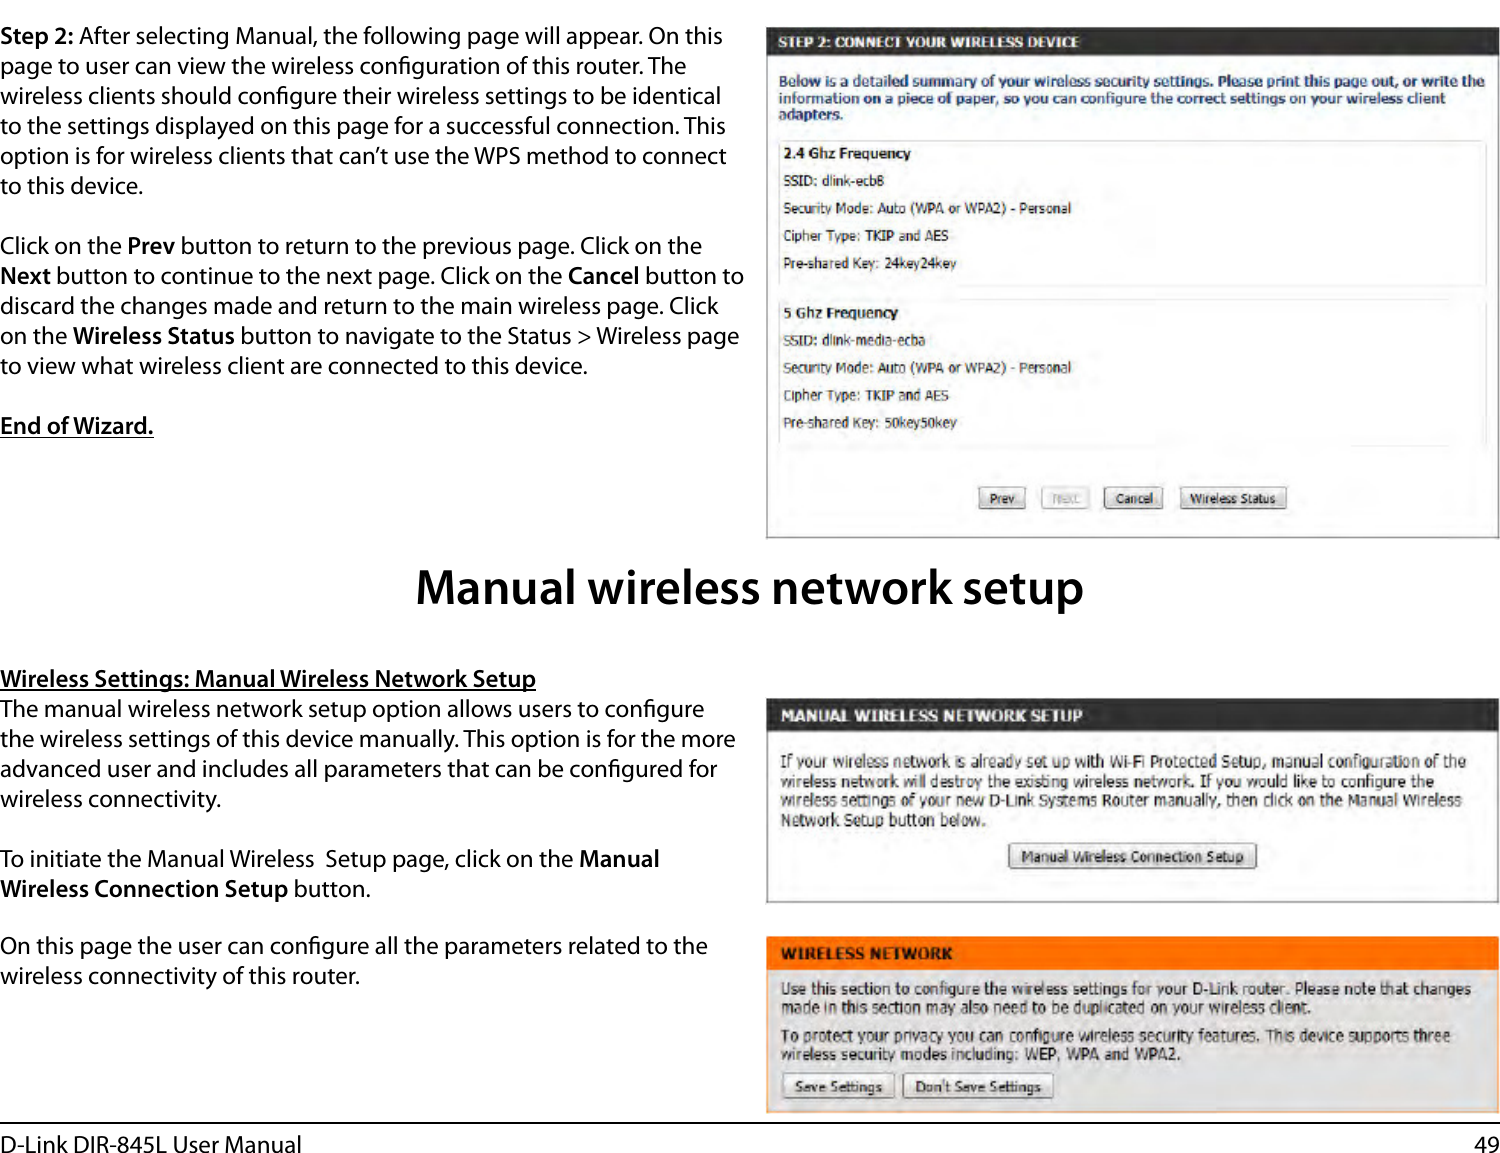 49D-Link DIR-845L User ManualStep 2: After selecting Manual, the following page will appear. On this page to user can view the wireless conguration of this router. The wireless clients should congure their wireless settings to be identical to the settings displayed on this page for a successful connection. This option is for wireless clients that can’t use the WPS method to connect to this device.Click on the Prev button to return to the previous page. Click on the Next button to continue to the next page. Click on the Cancel button to discard the changes made and return to the main wireless page. Click on the Wireless Status button to navigate to the Status &gt; Wireless page to view what wireless client are connected to this device.End of Wizard.Wireless Settings: Manual Wireless Network SetupThe manual wireless network setup option allows users to congure the wireless settings of this device manually. This option is for the more advanced user and includes all parameters that can be congured for wireless connectivity.To initiate the Manual Wireless  Setup page, click on the Manual Wireless Connection Setup button.On this page the user can congure all the parameters related to the wireless connectivity of this router.Manual wireless network setup